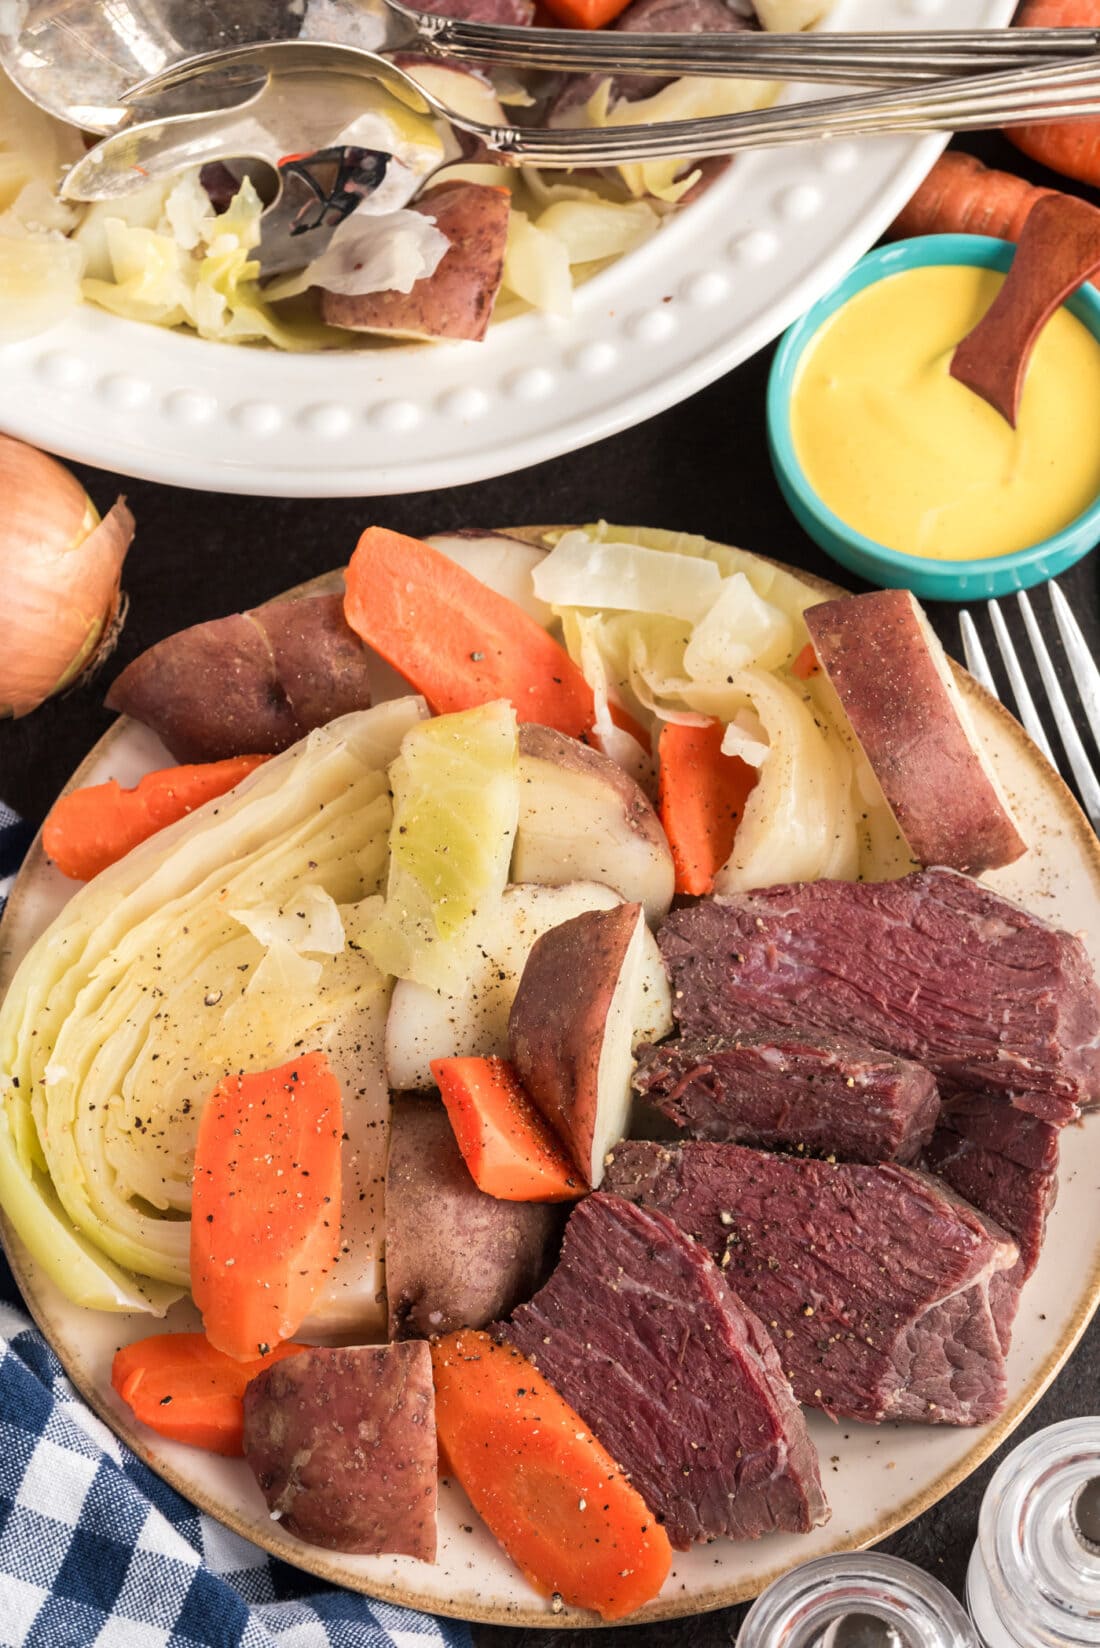 Plate of Corned Beef and Cabbage